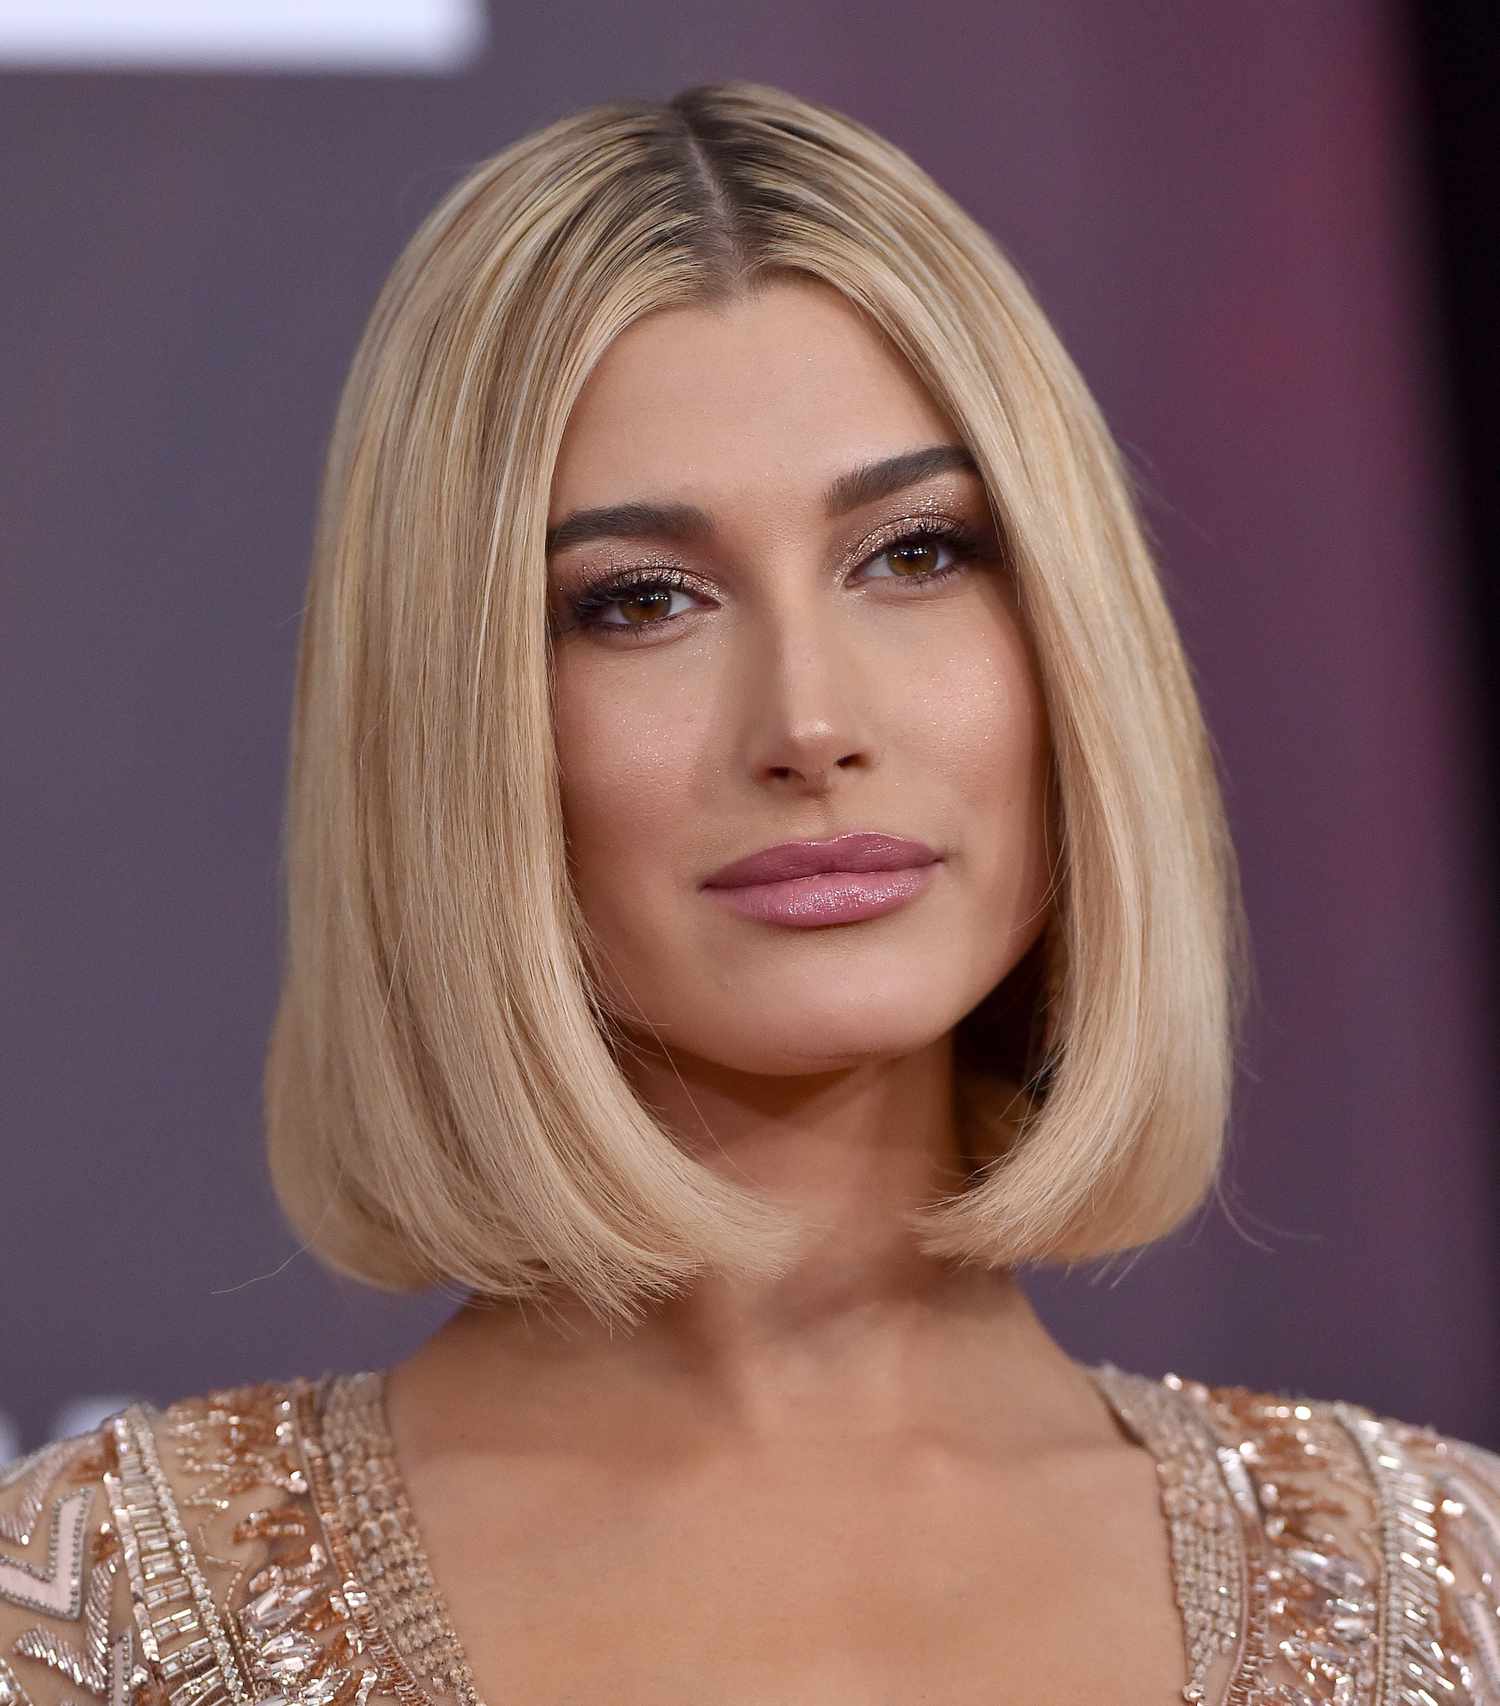 Hailey Bieber wearing a curved voluminous bob hairstyle and radiant makeup look